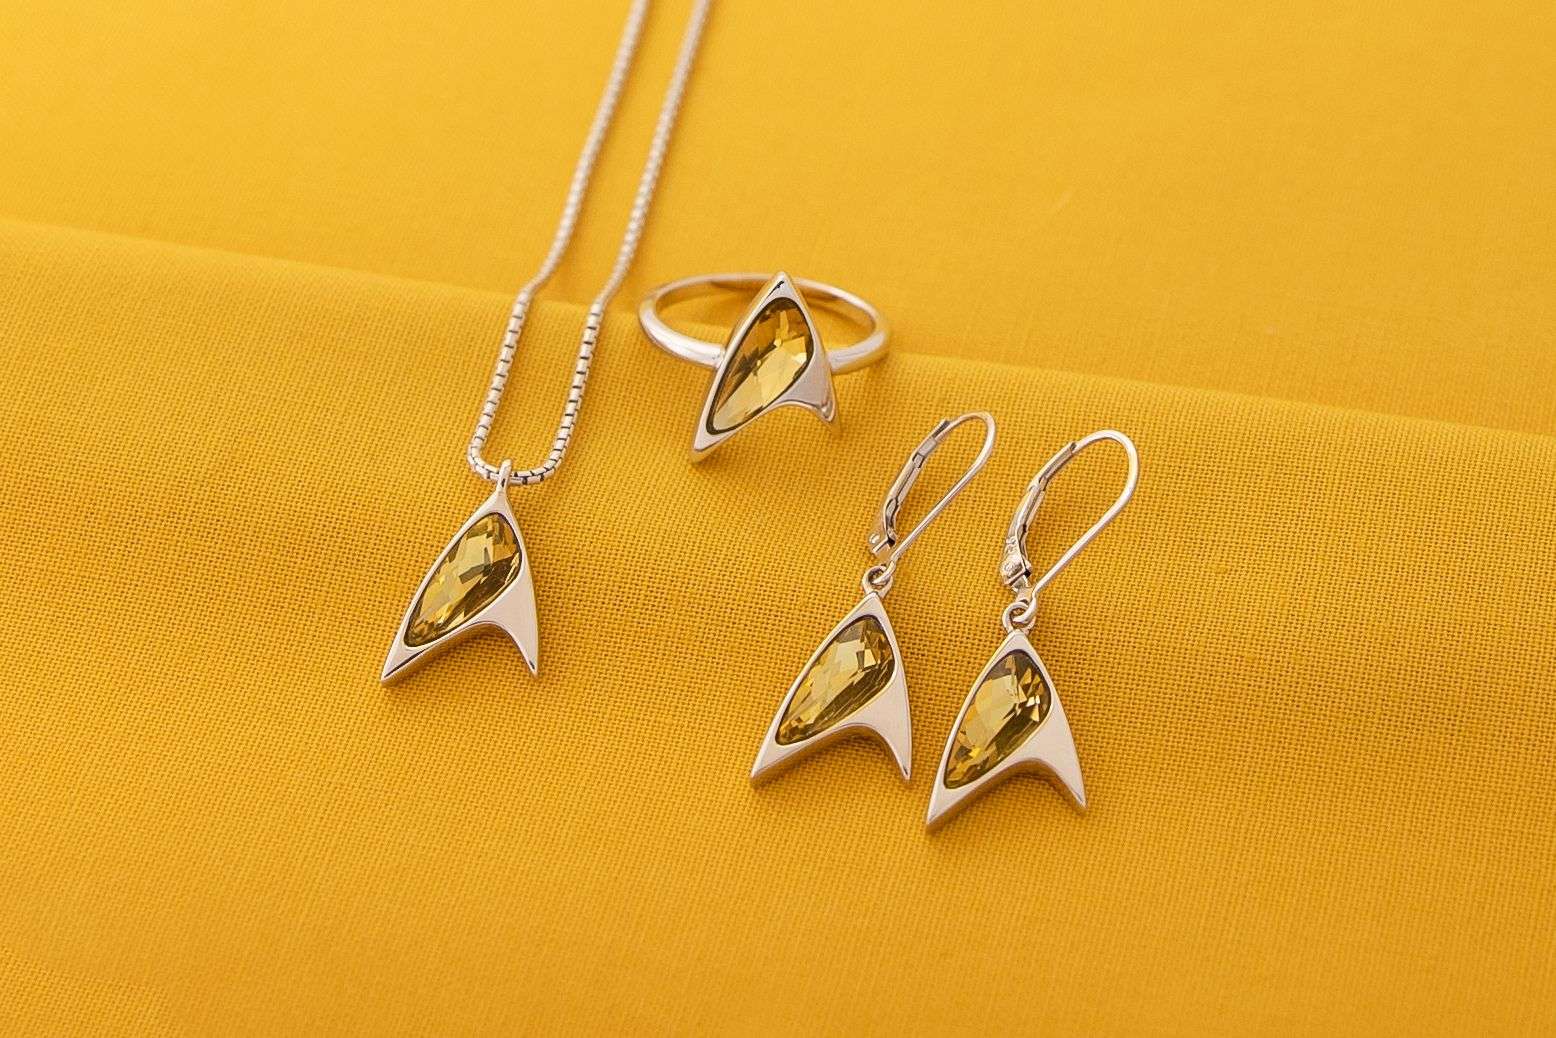 rocklove Star Trek delta shield jewelry - necklace, ring and earrings - command yellow